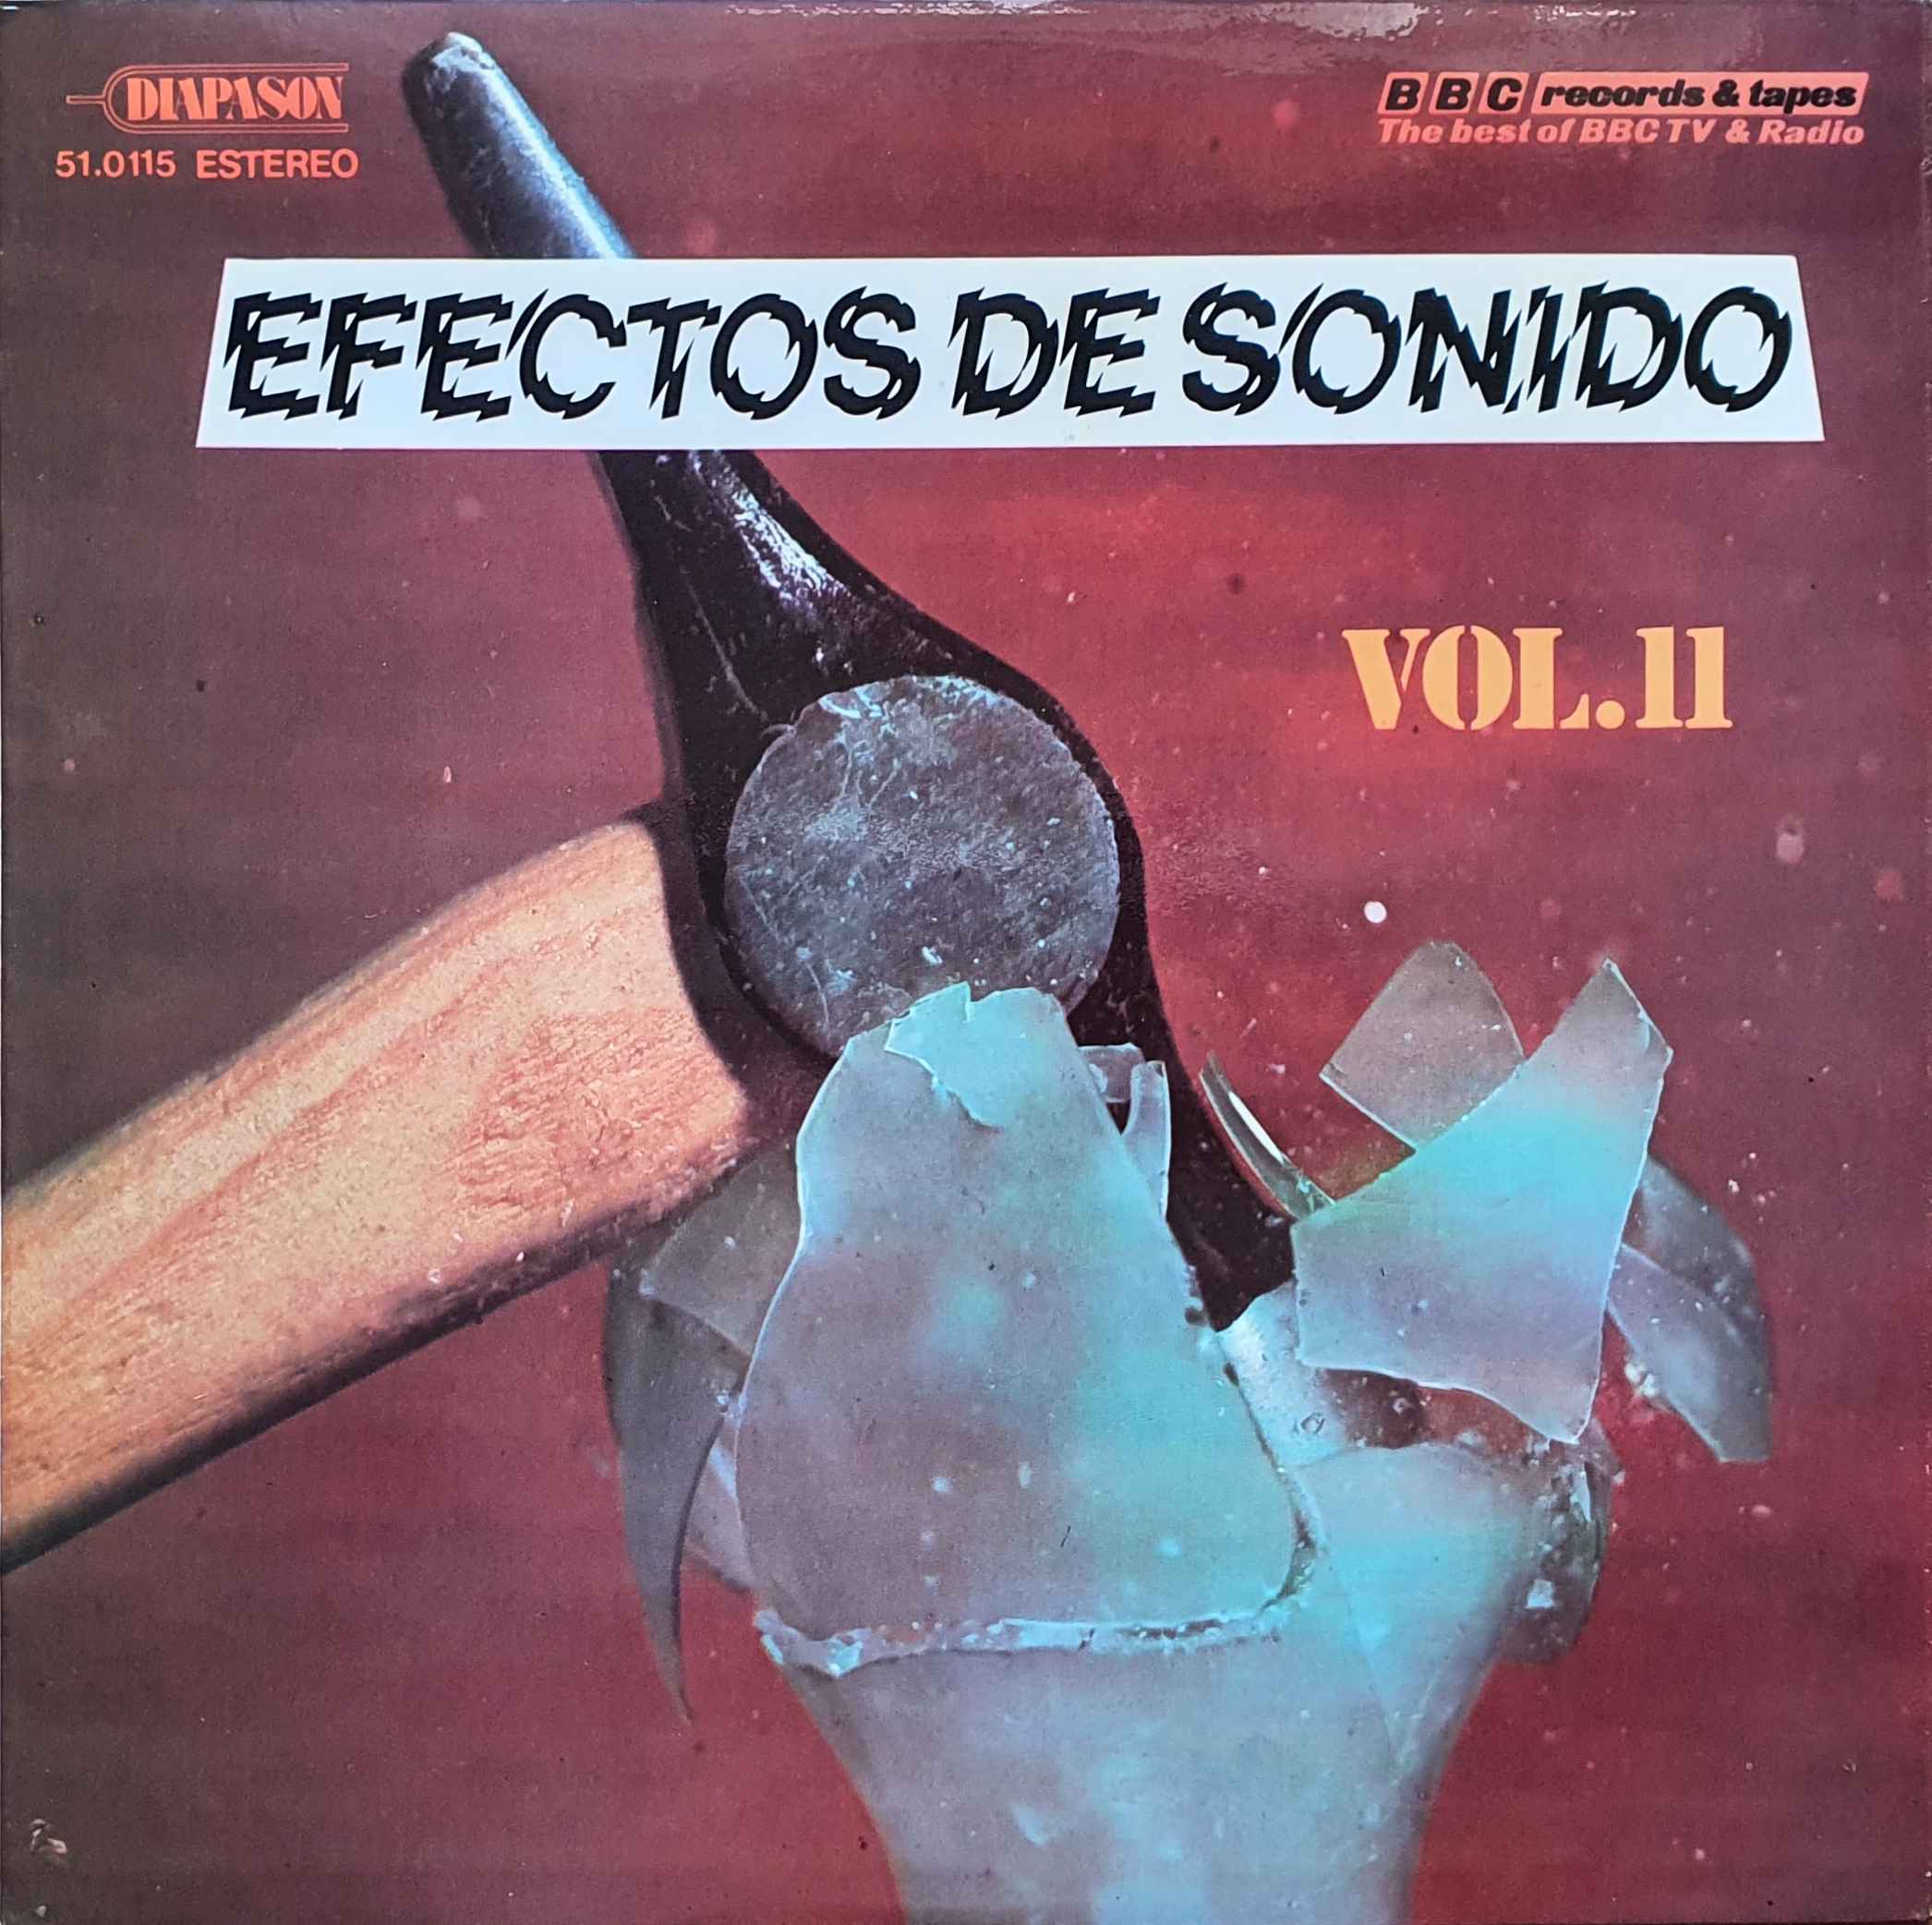 Picture of 51.0115 Efectos de sonido Vol.11 by artist Various from the BBC albums - Records and Tapes library